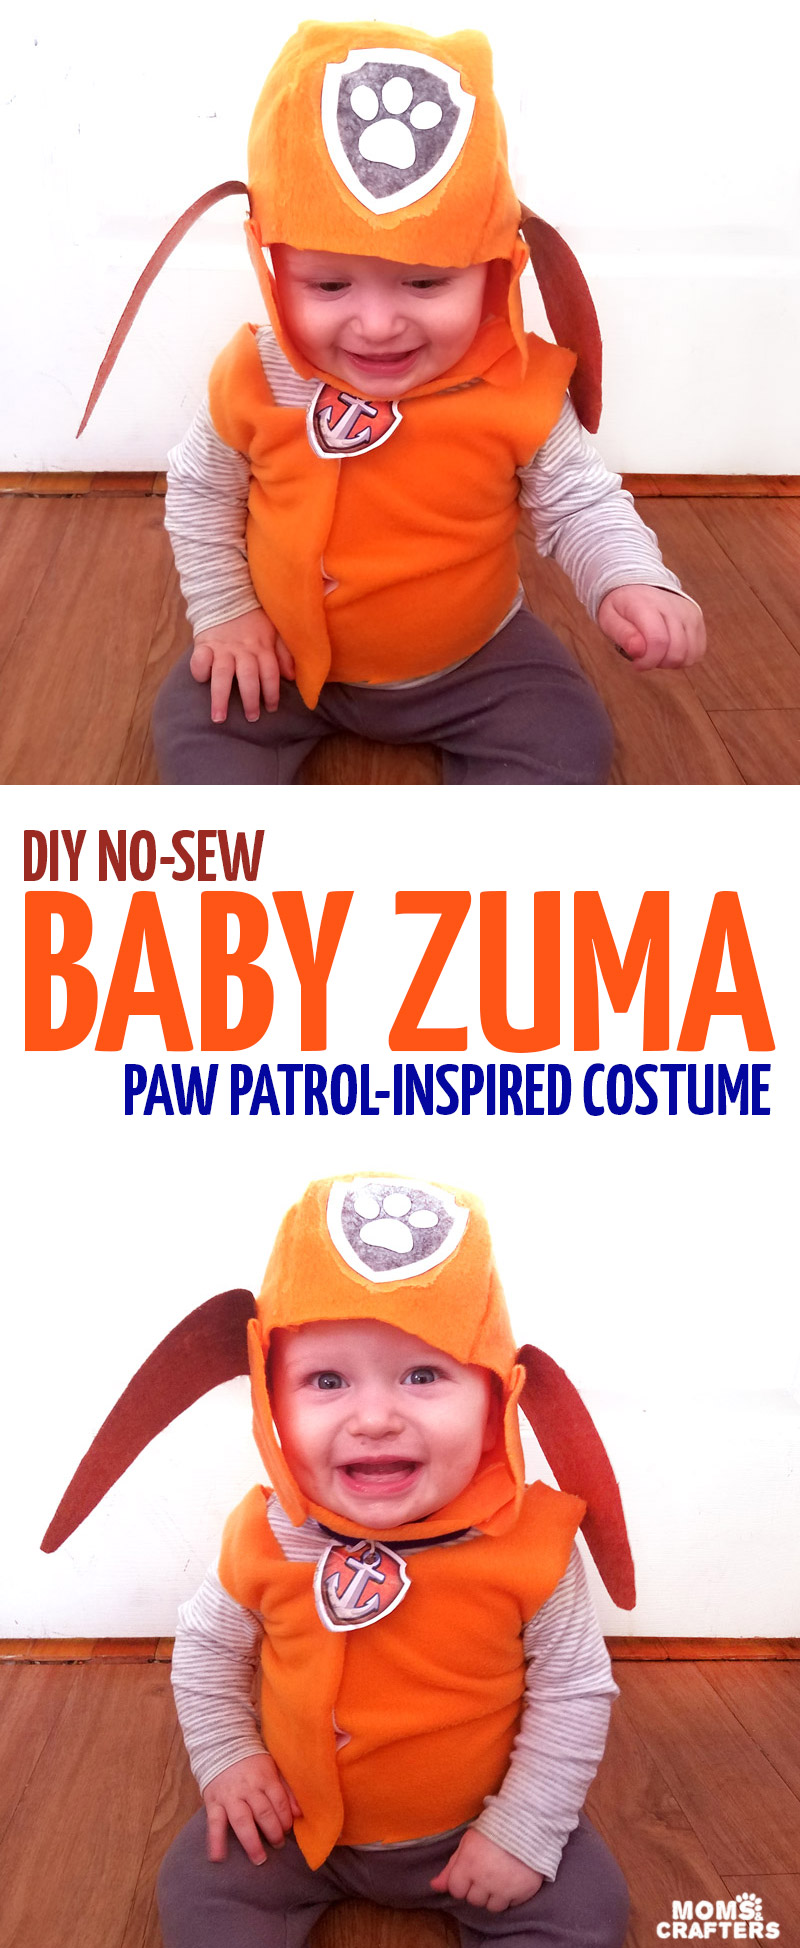 Baby Zuma PAW Patrol Costume DIY * Moms and Crafters